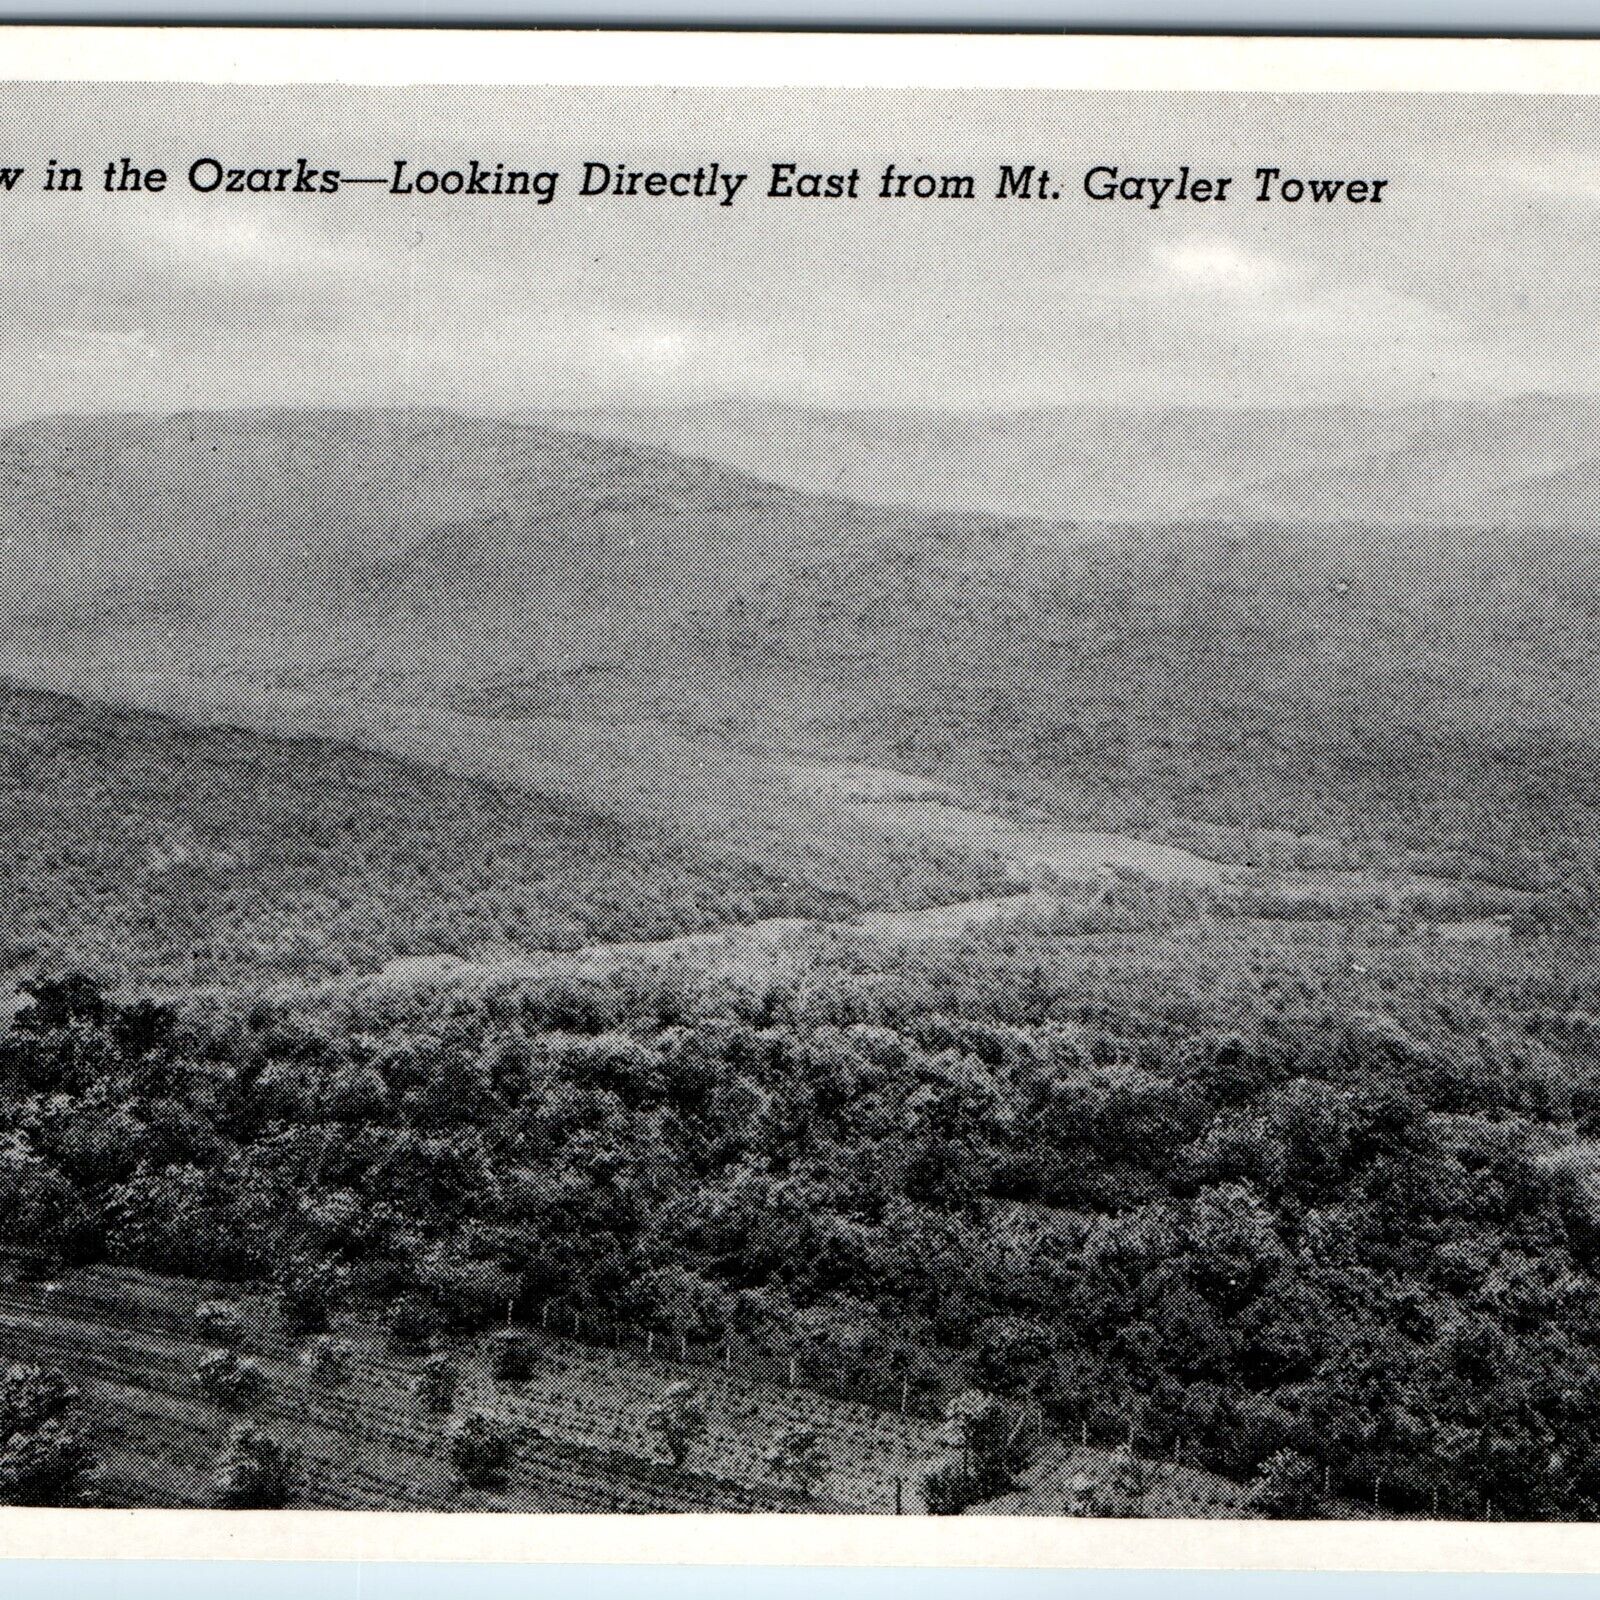 c1950s Mount Gayler, AK Mt Gayler Tower Scenic View Ozarks Litho Photo PC A149